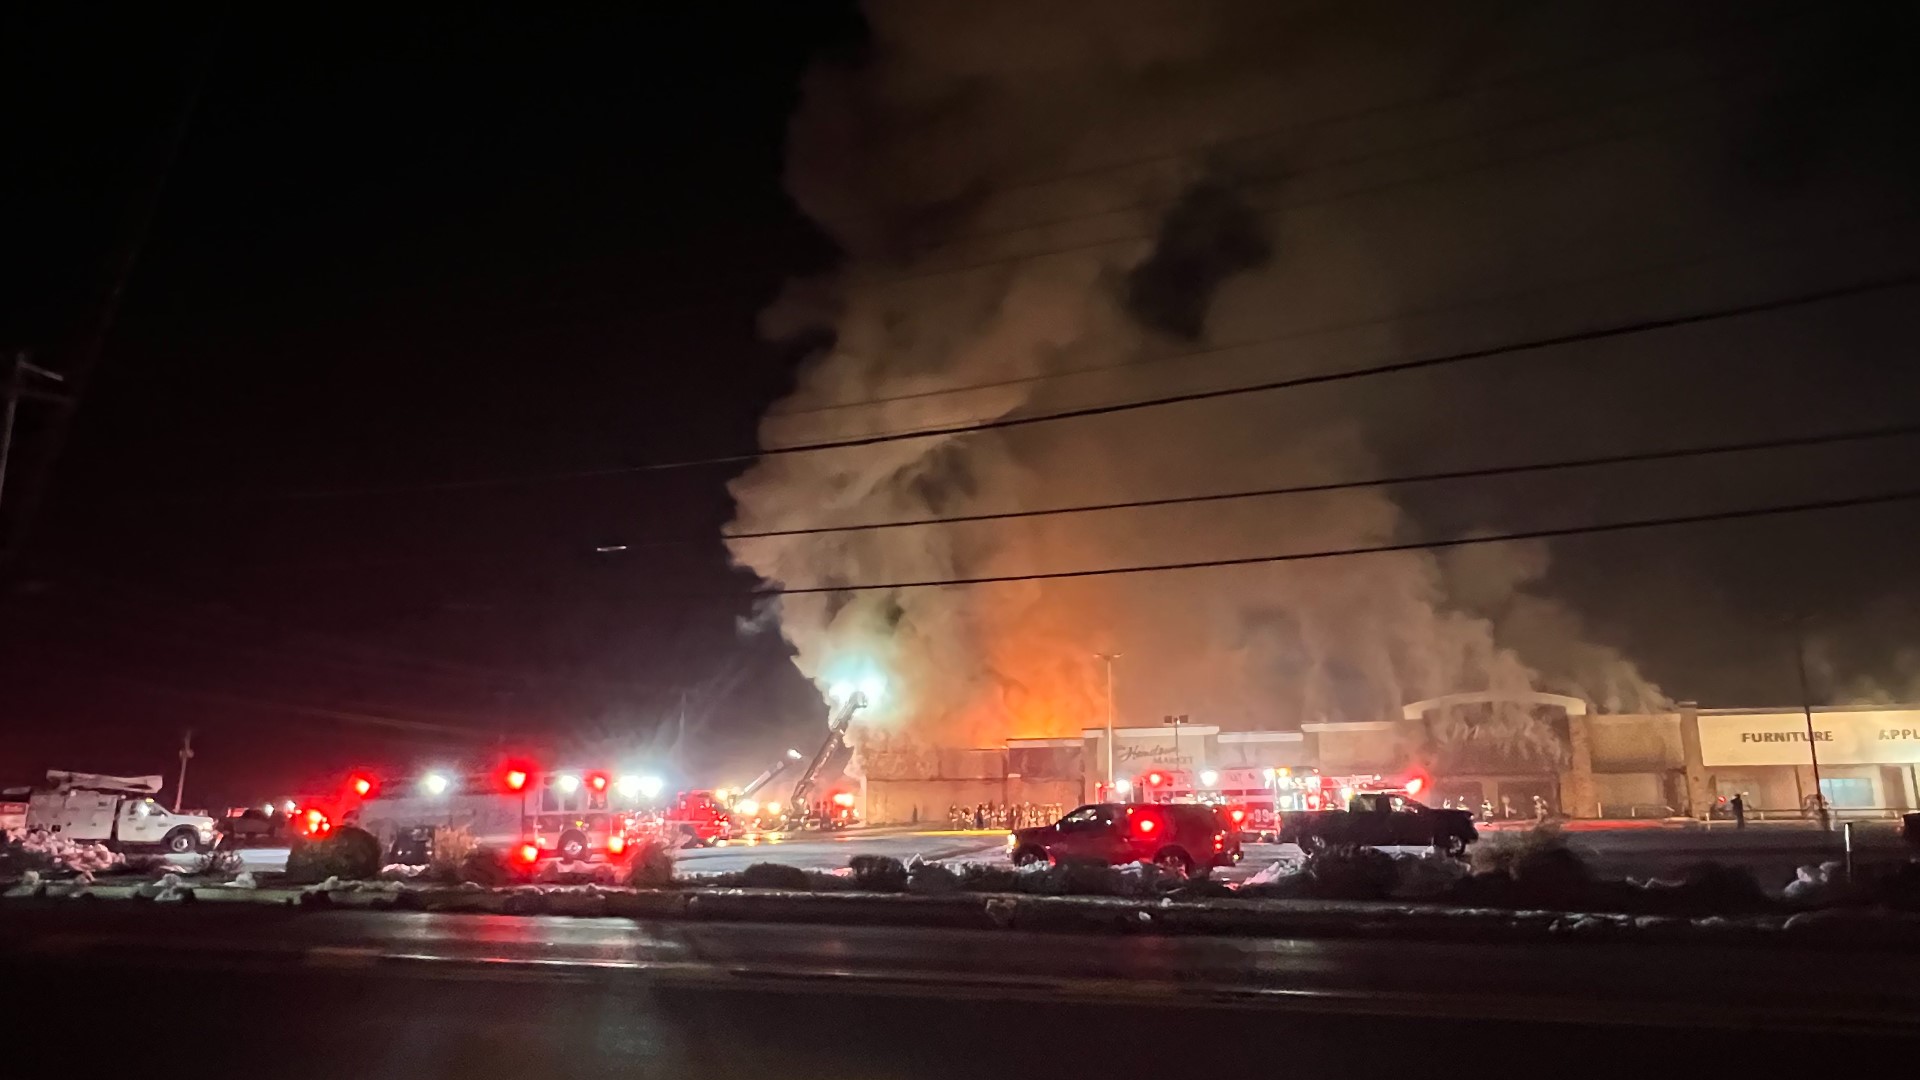 The fire broke out just before 4 a.m. on Feb. 15 at Martin's Country Market in Ephrata Township, according to Lancaster County 911 Dispatch.